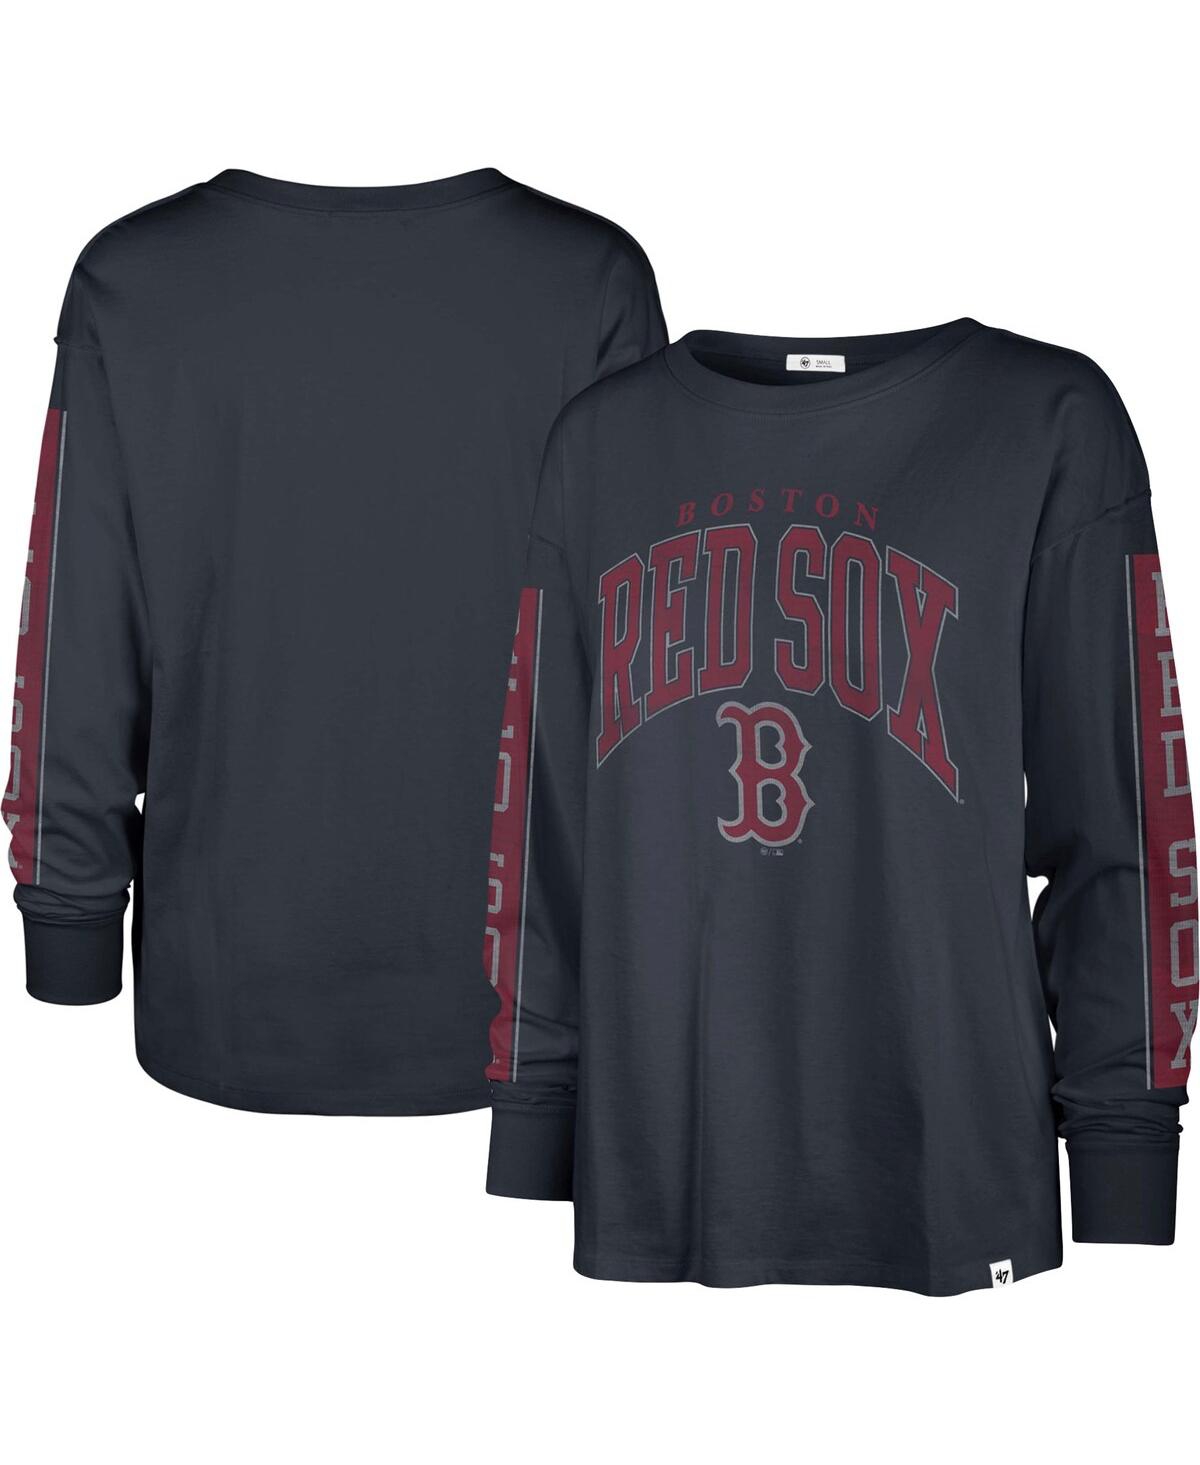 47 Brand Banner 47 Boston Red Sox Distressed T-Shirt Size